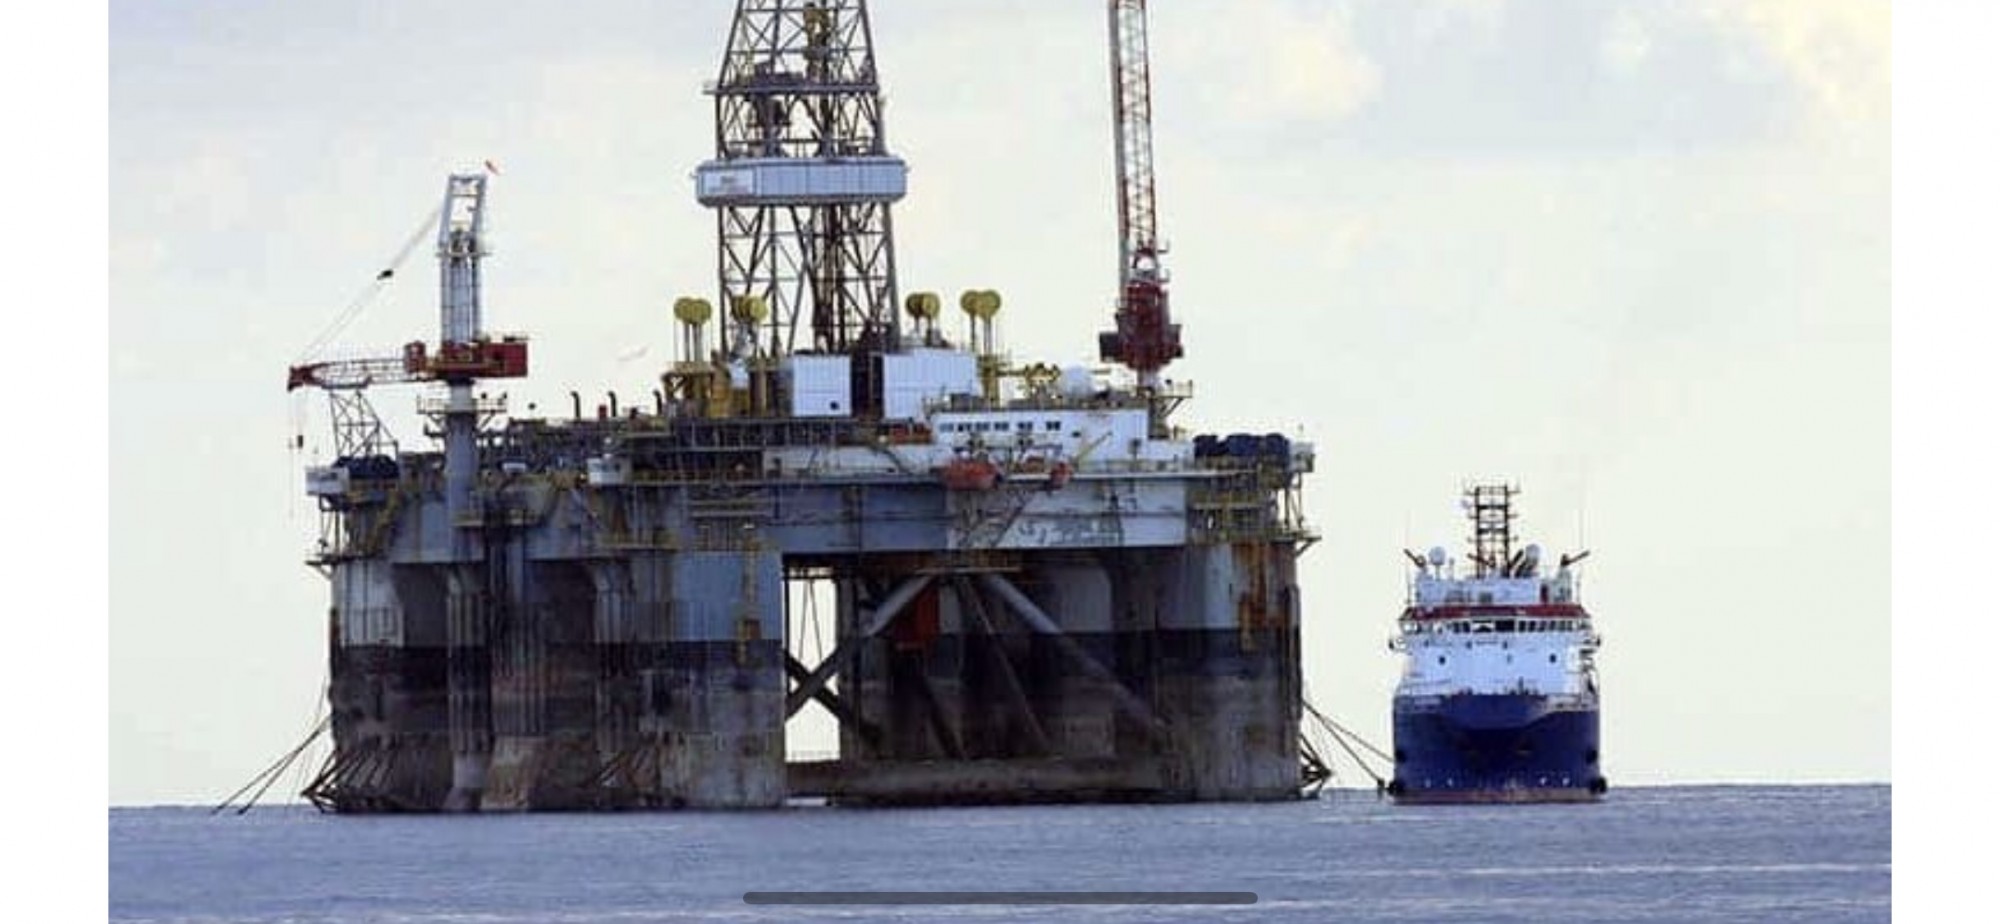 ExxonMobil set to receive drilling licences within days